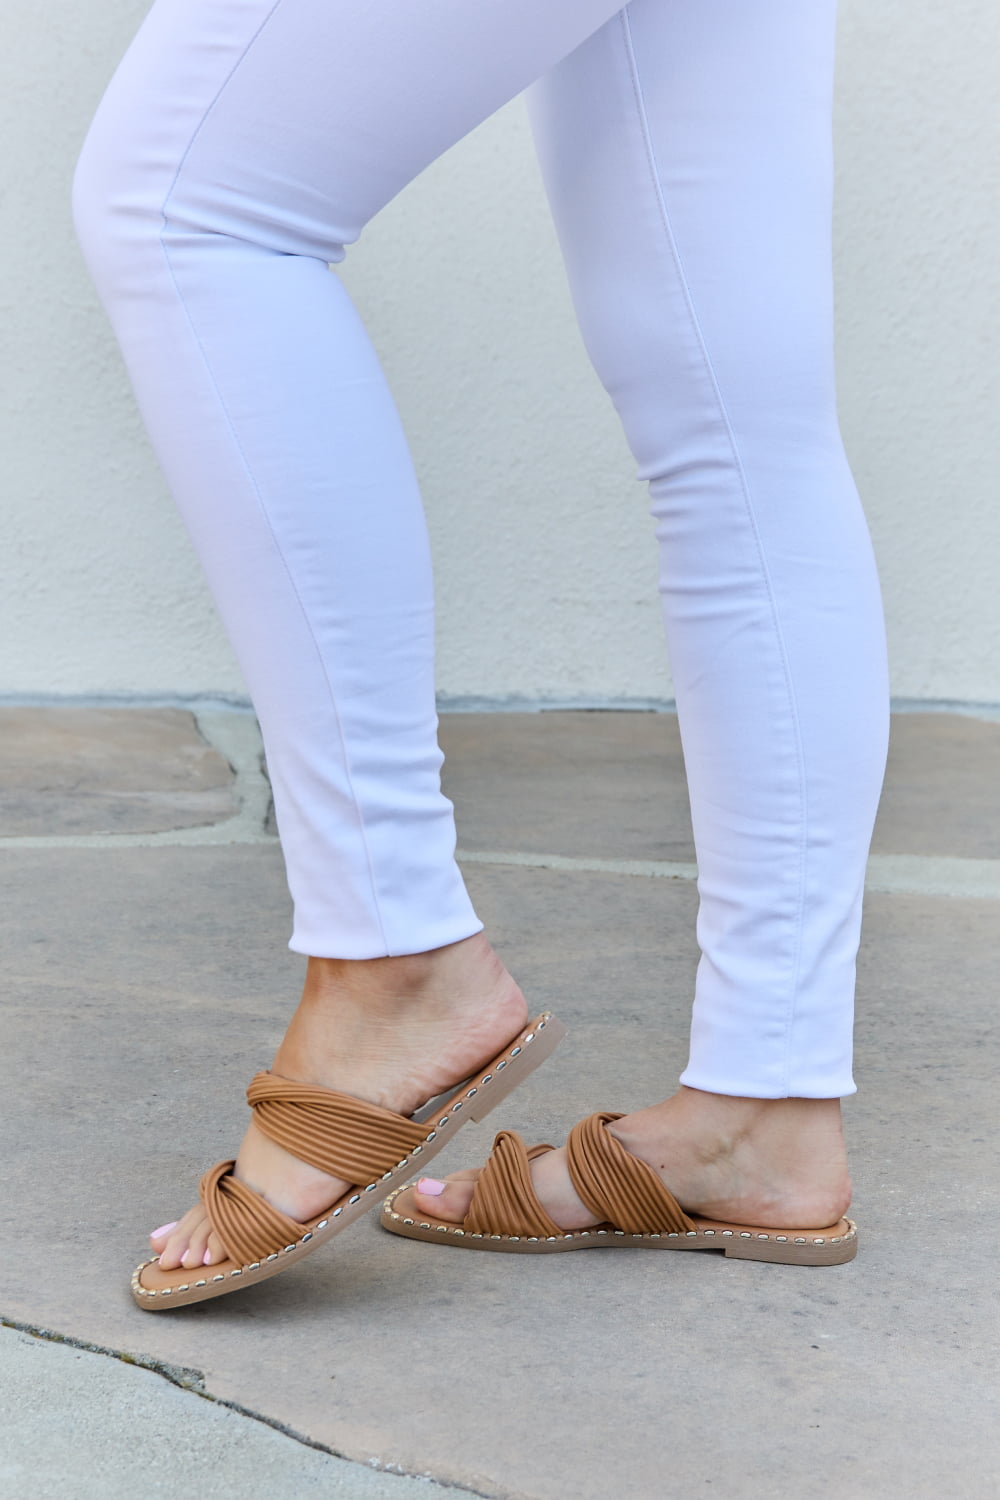 Double Strap Twist Sandals in CamelSandalsQupid